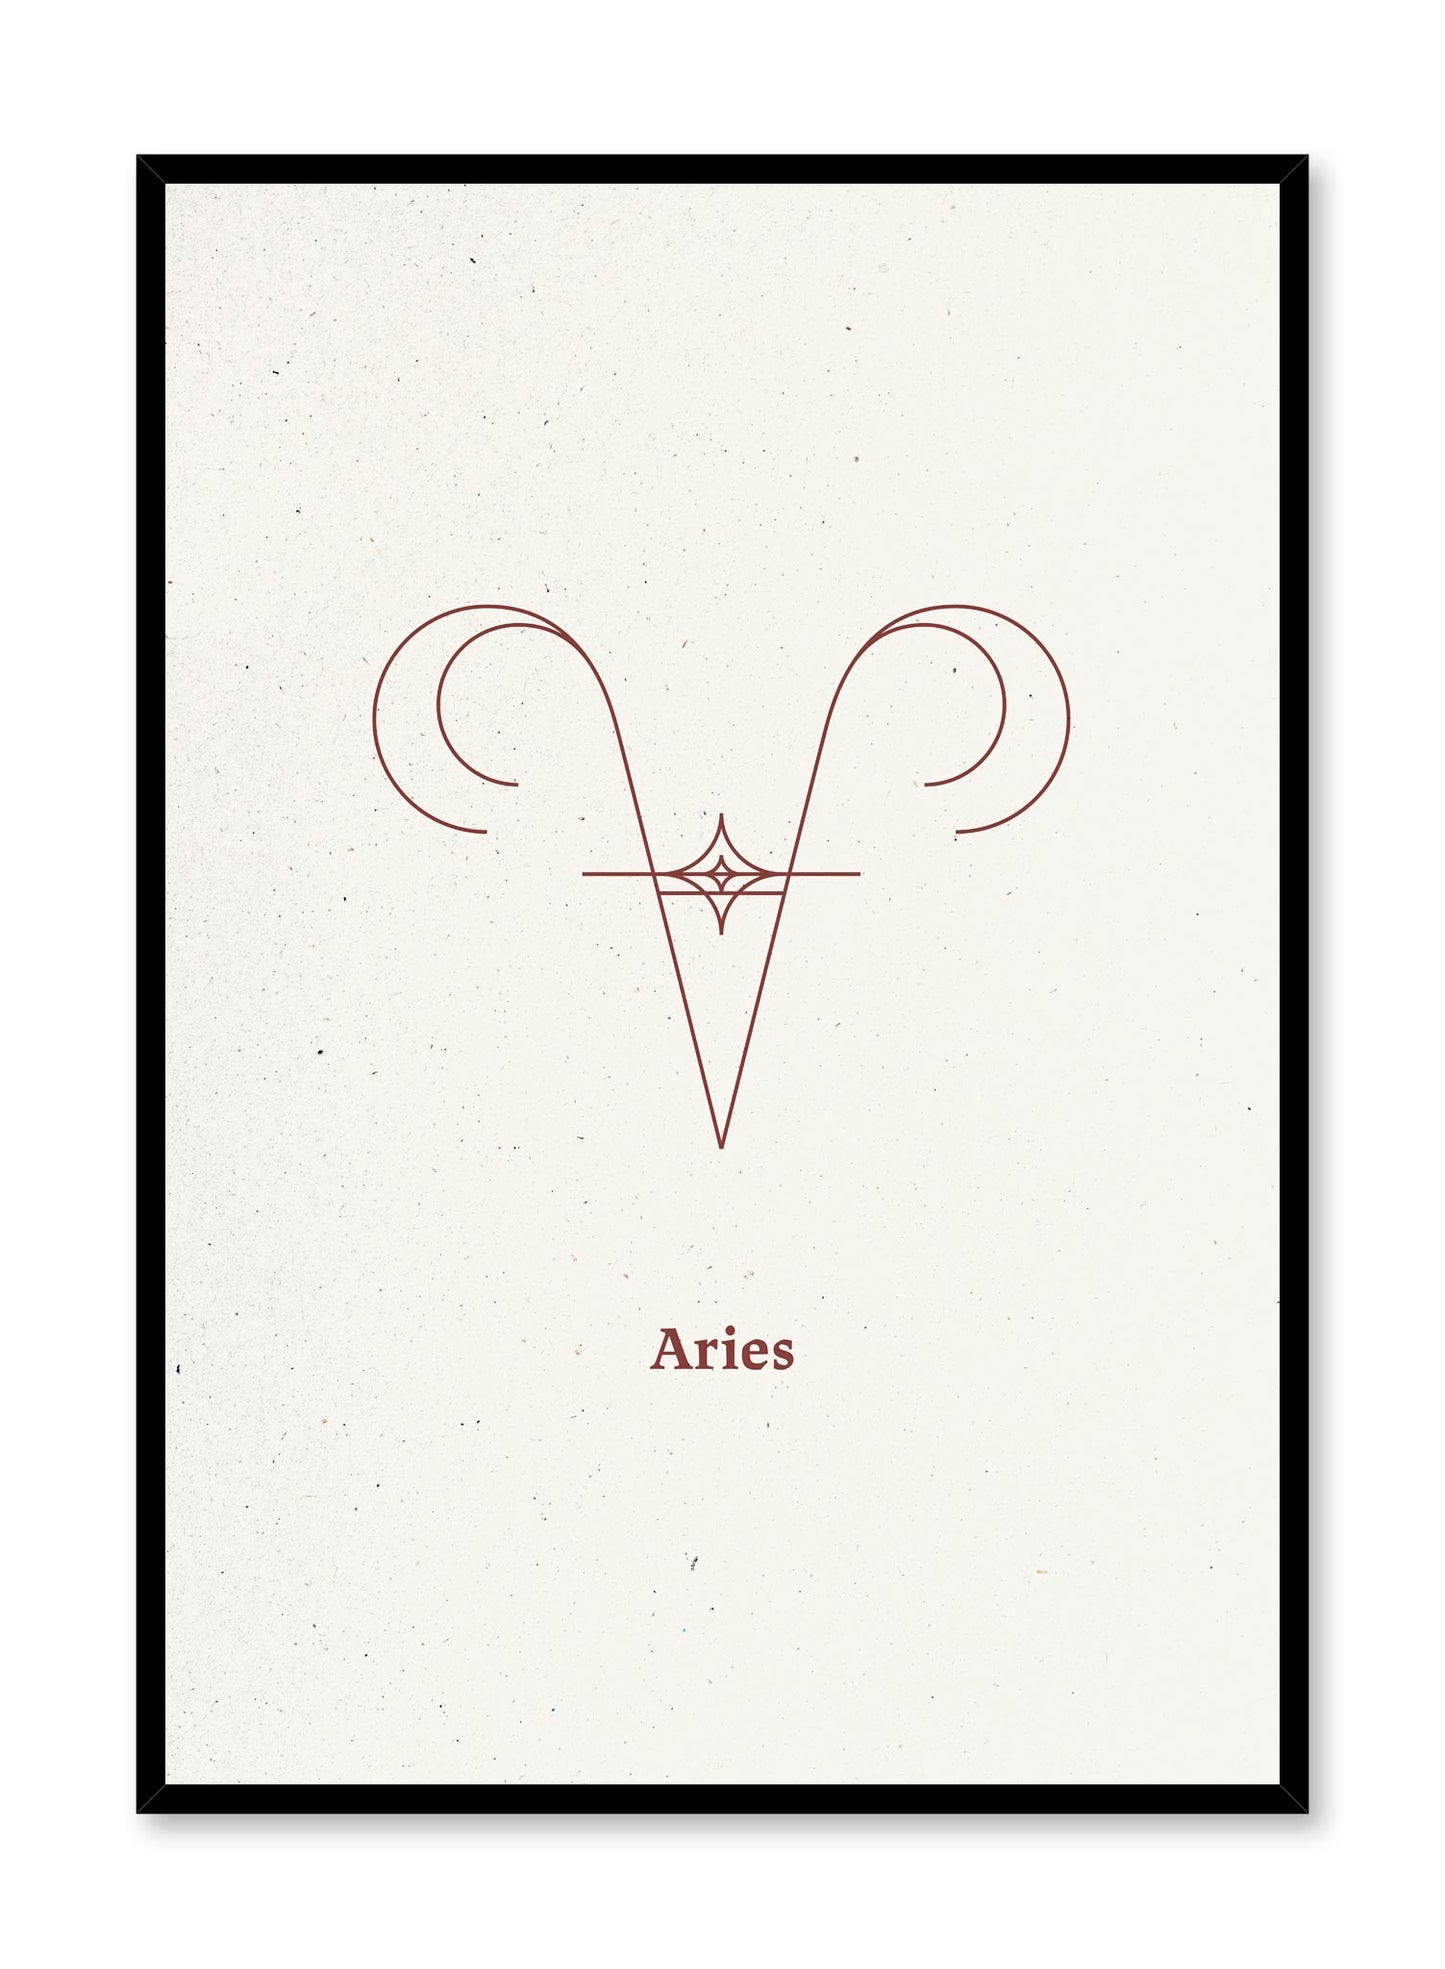 Minimalist celestial illustration poster by Opposite Wall with Aries symbol